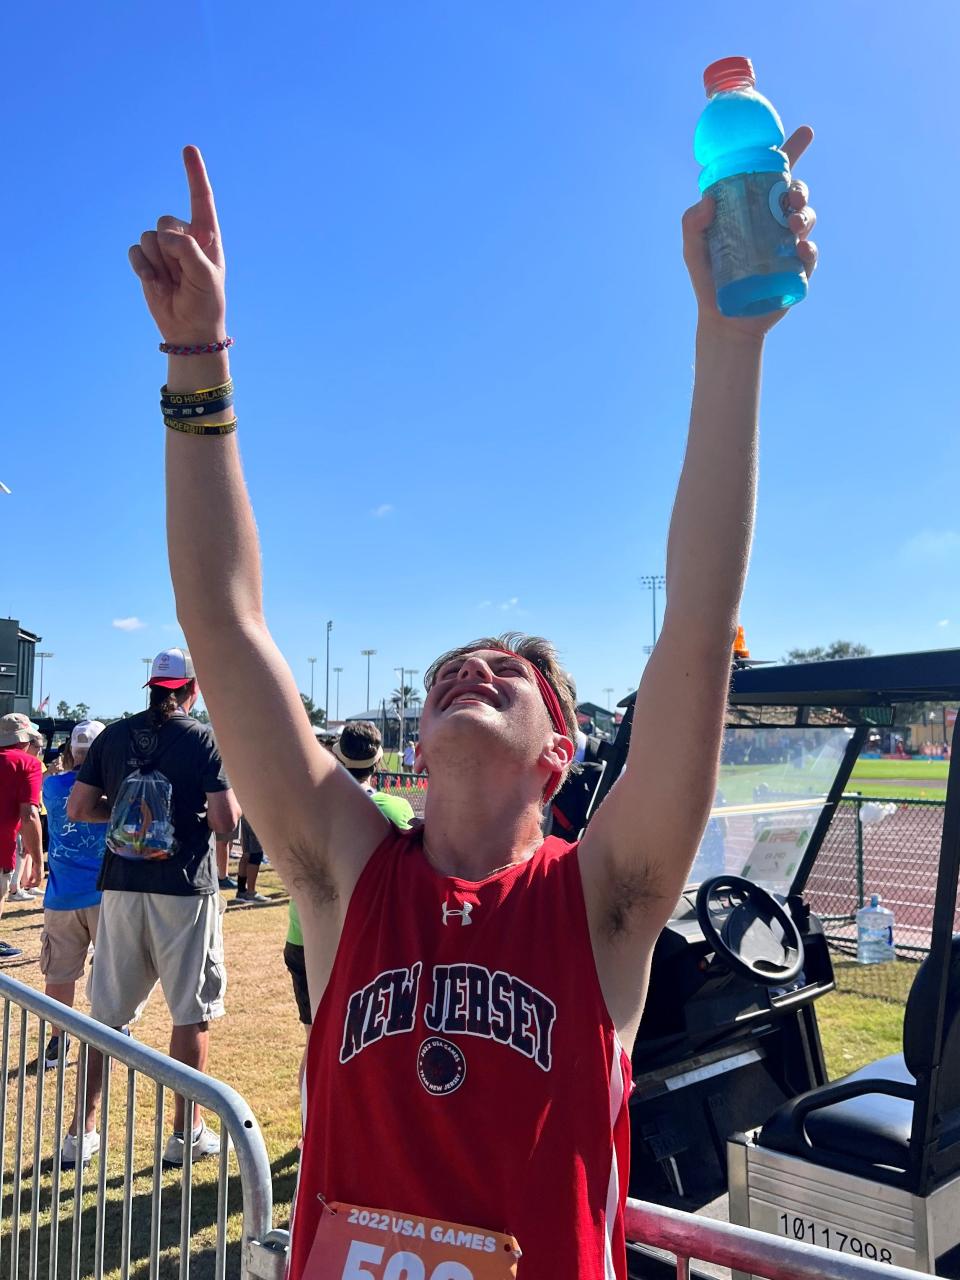 Michael McCloskey, a 17-year-old from West Milford, celebrates after winning the 1,500 meters at the Special Olympics USA Games on June 7, 2022.